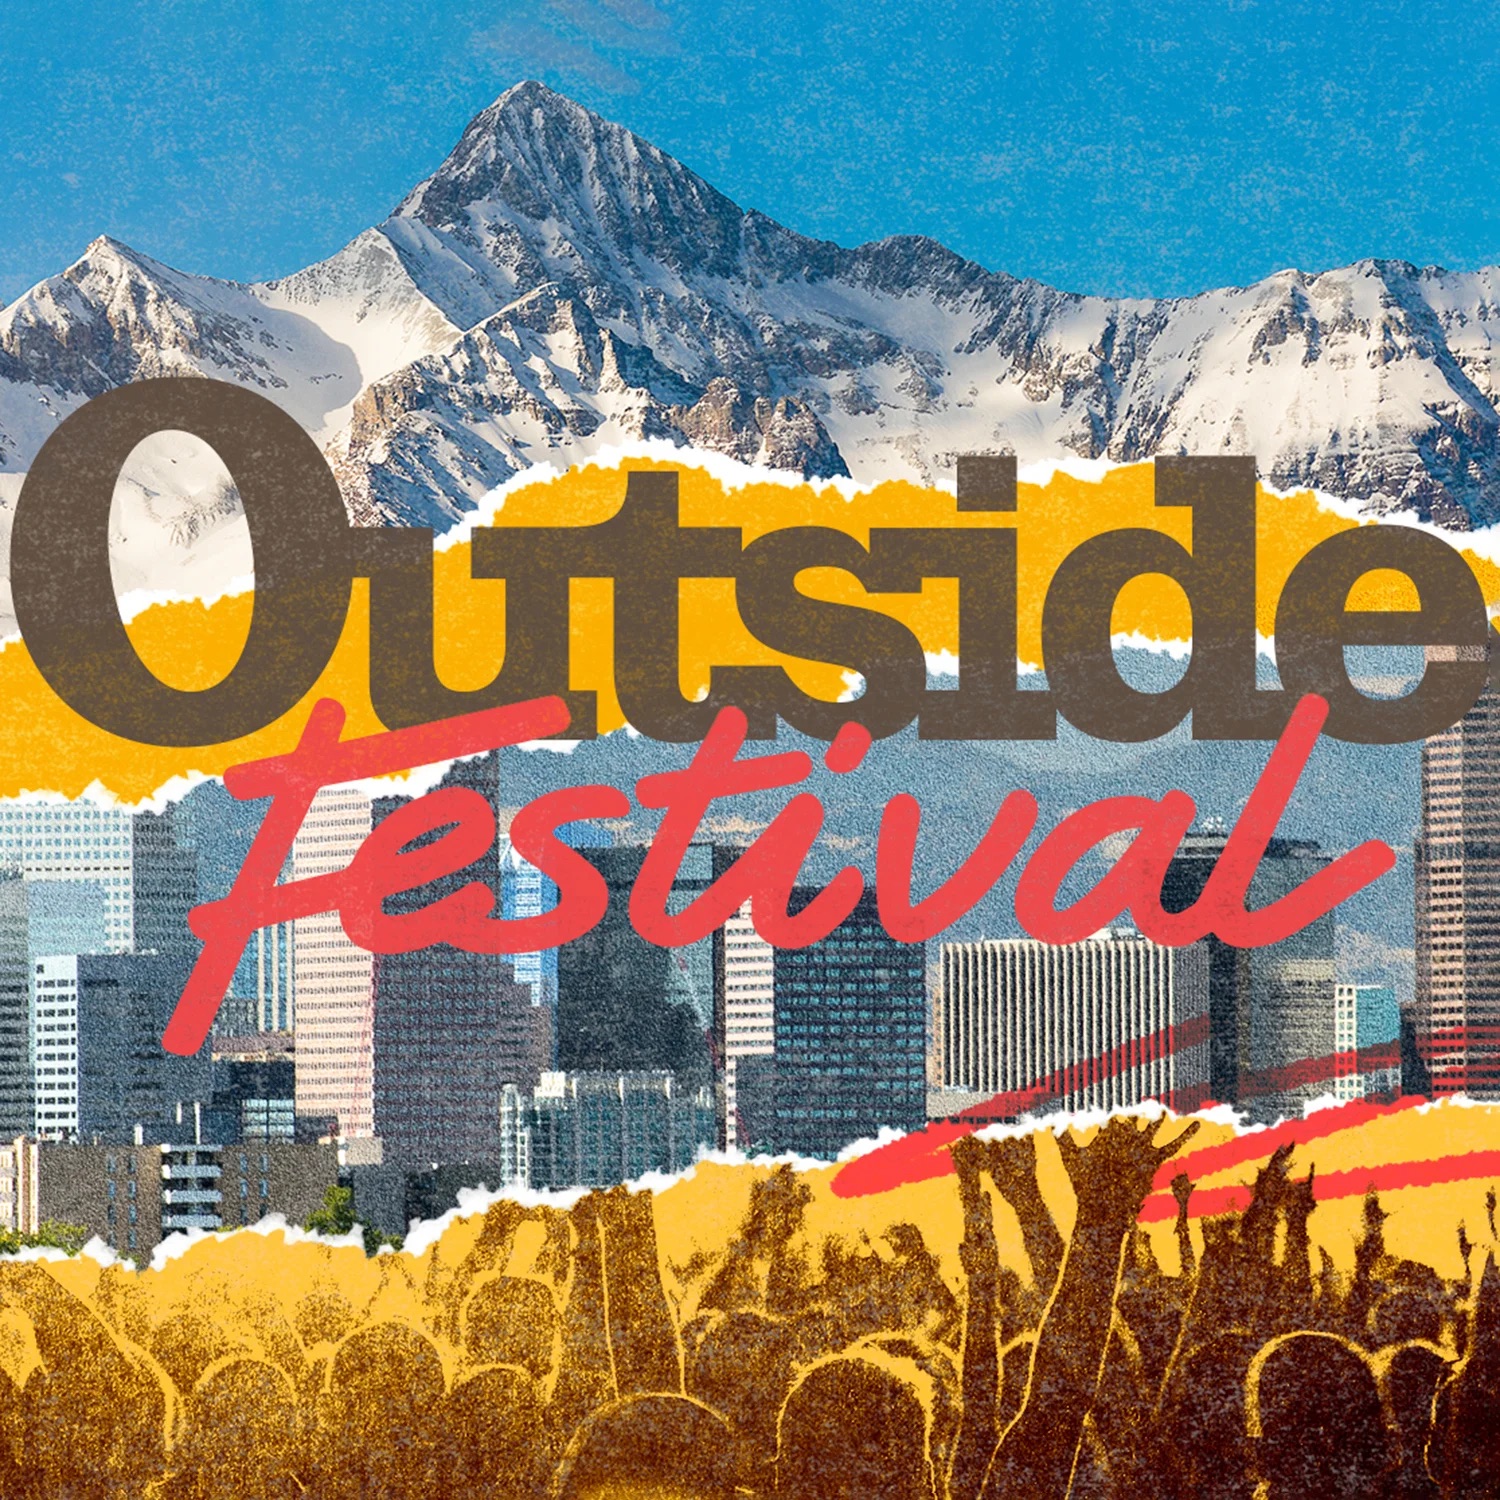 Experience The Inaugural ‘Outside Festival’: June 1st and 2nd in Colorado. Tickets Available Now!